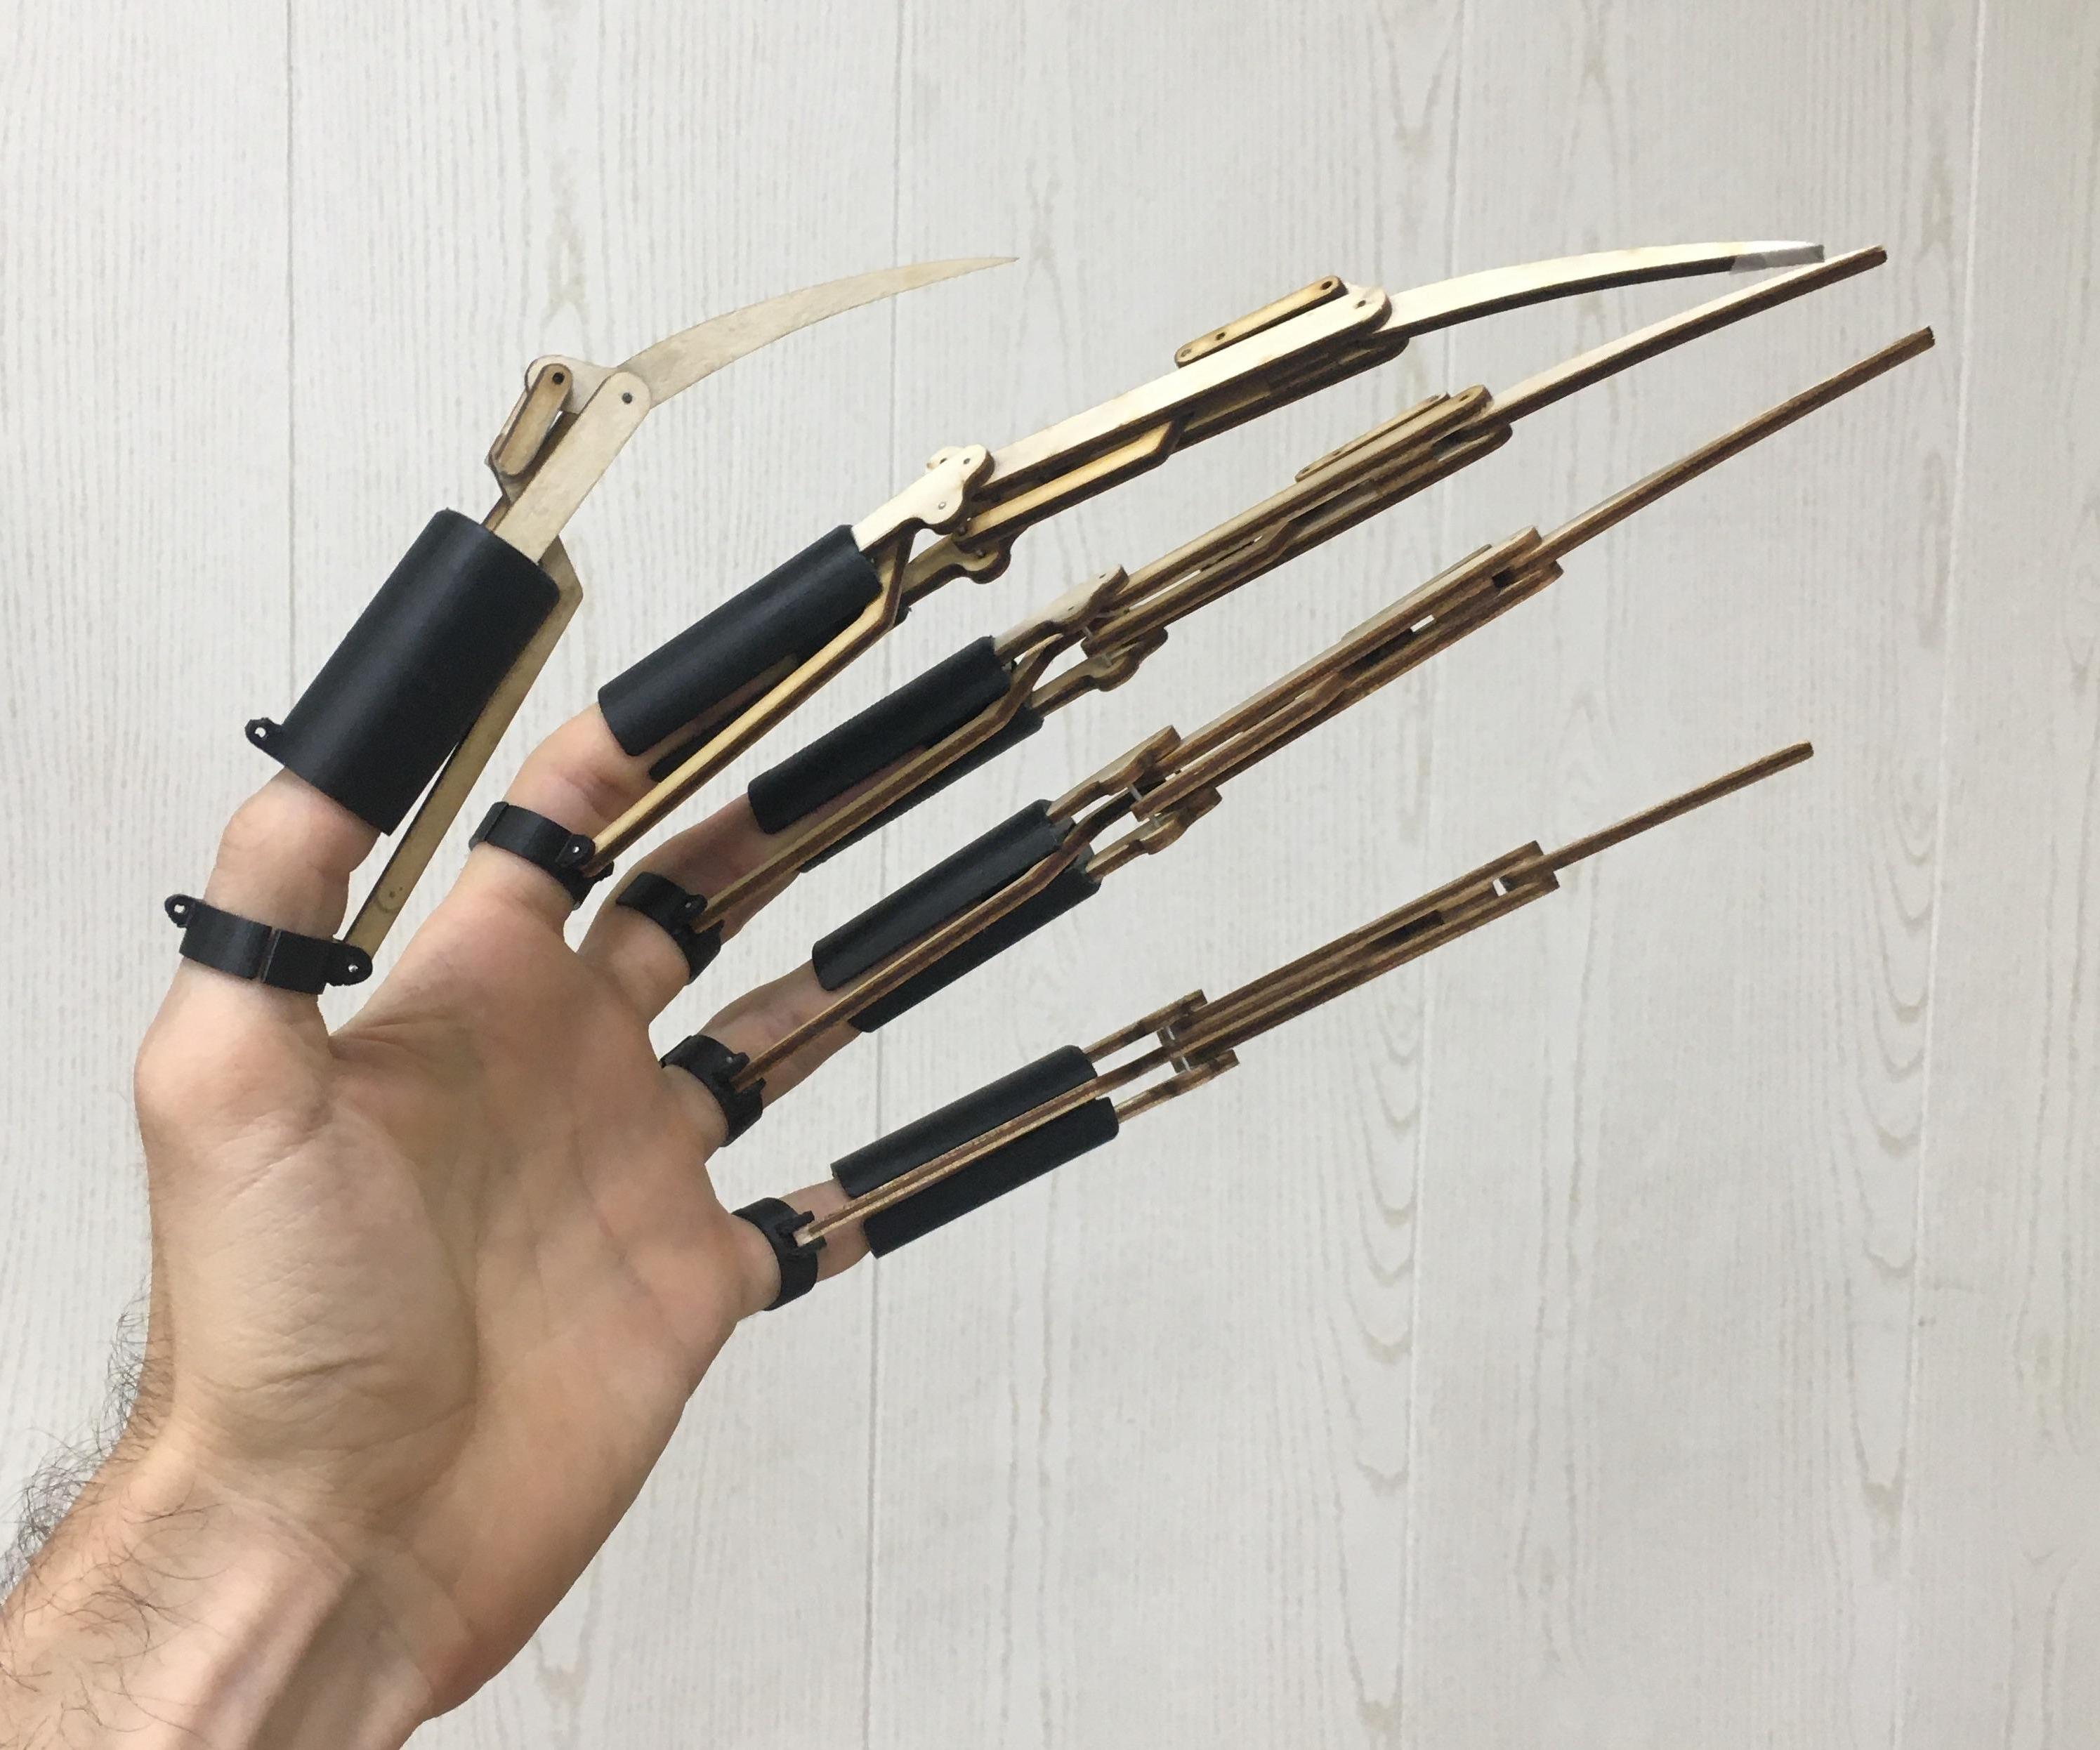 Articulated Finger Extensions